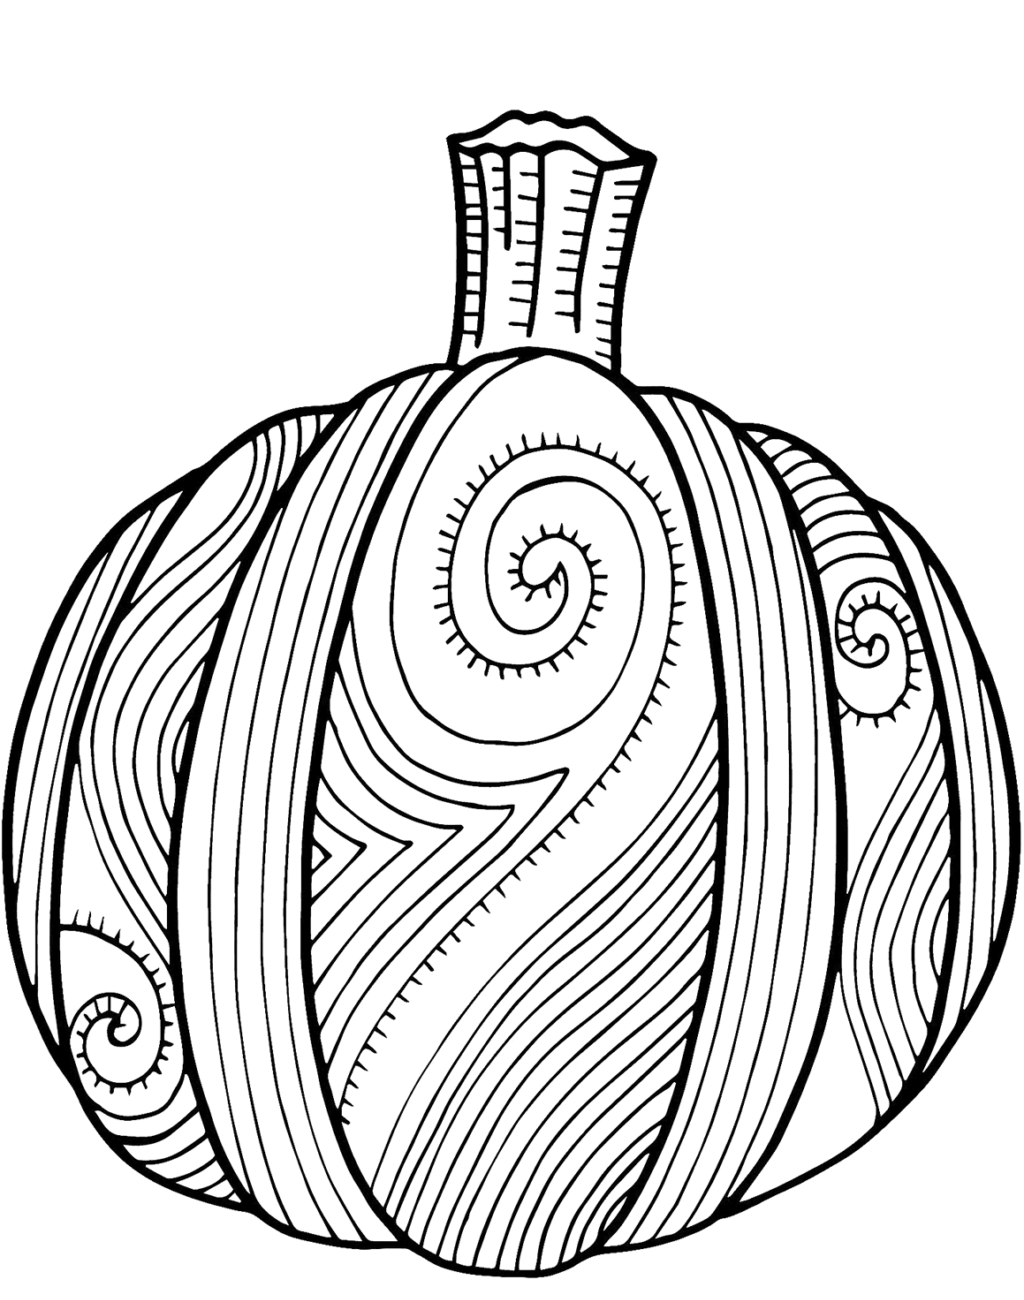 halloween pumpkins coloring pages